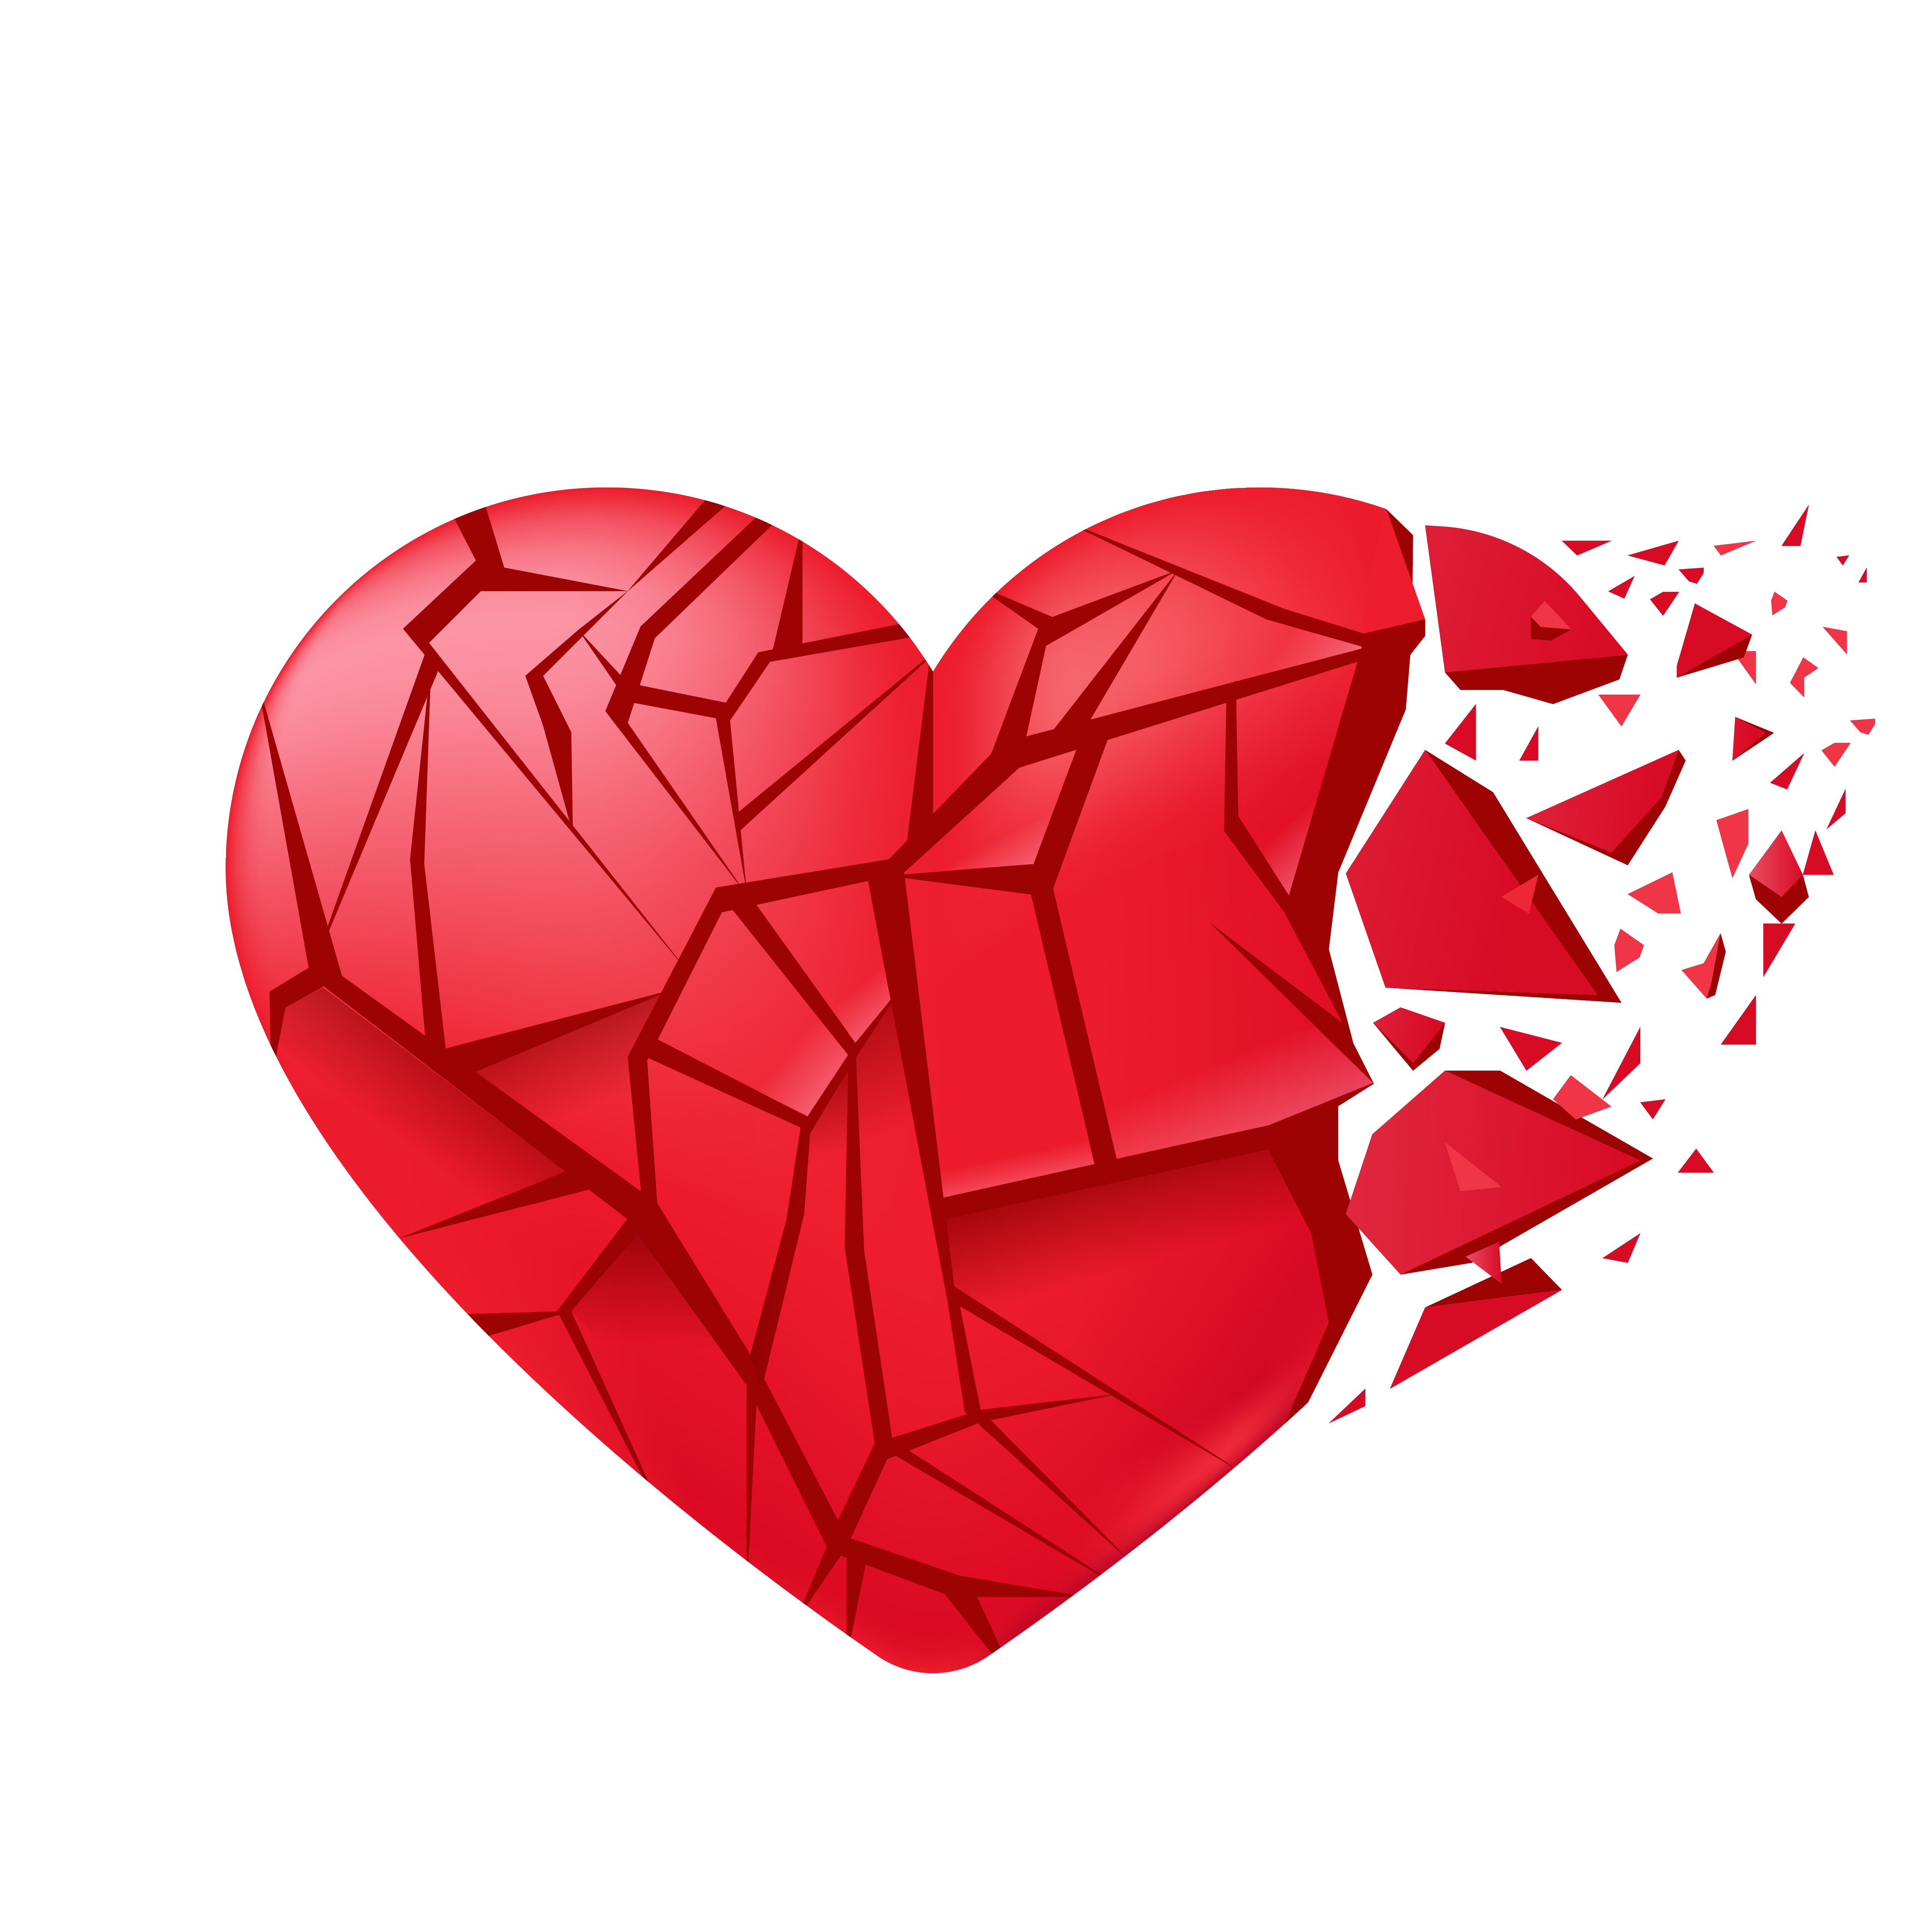 Broken Heart Sealed Isolated Red Glass Shards Vector Realistic